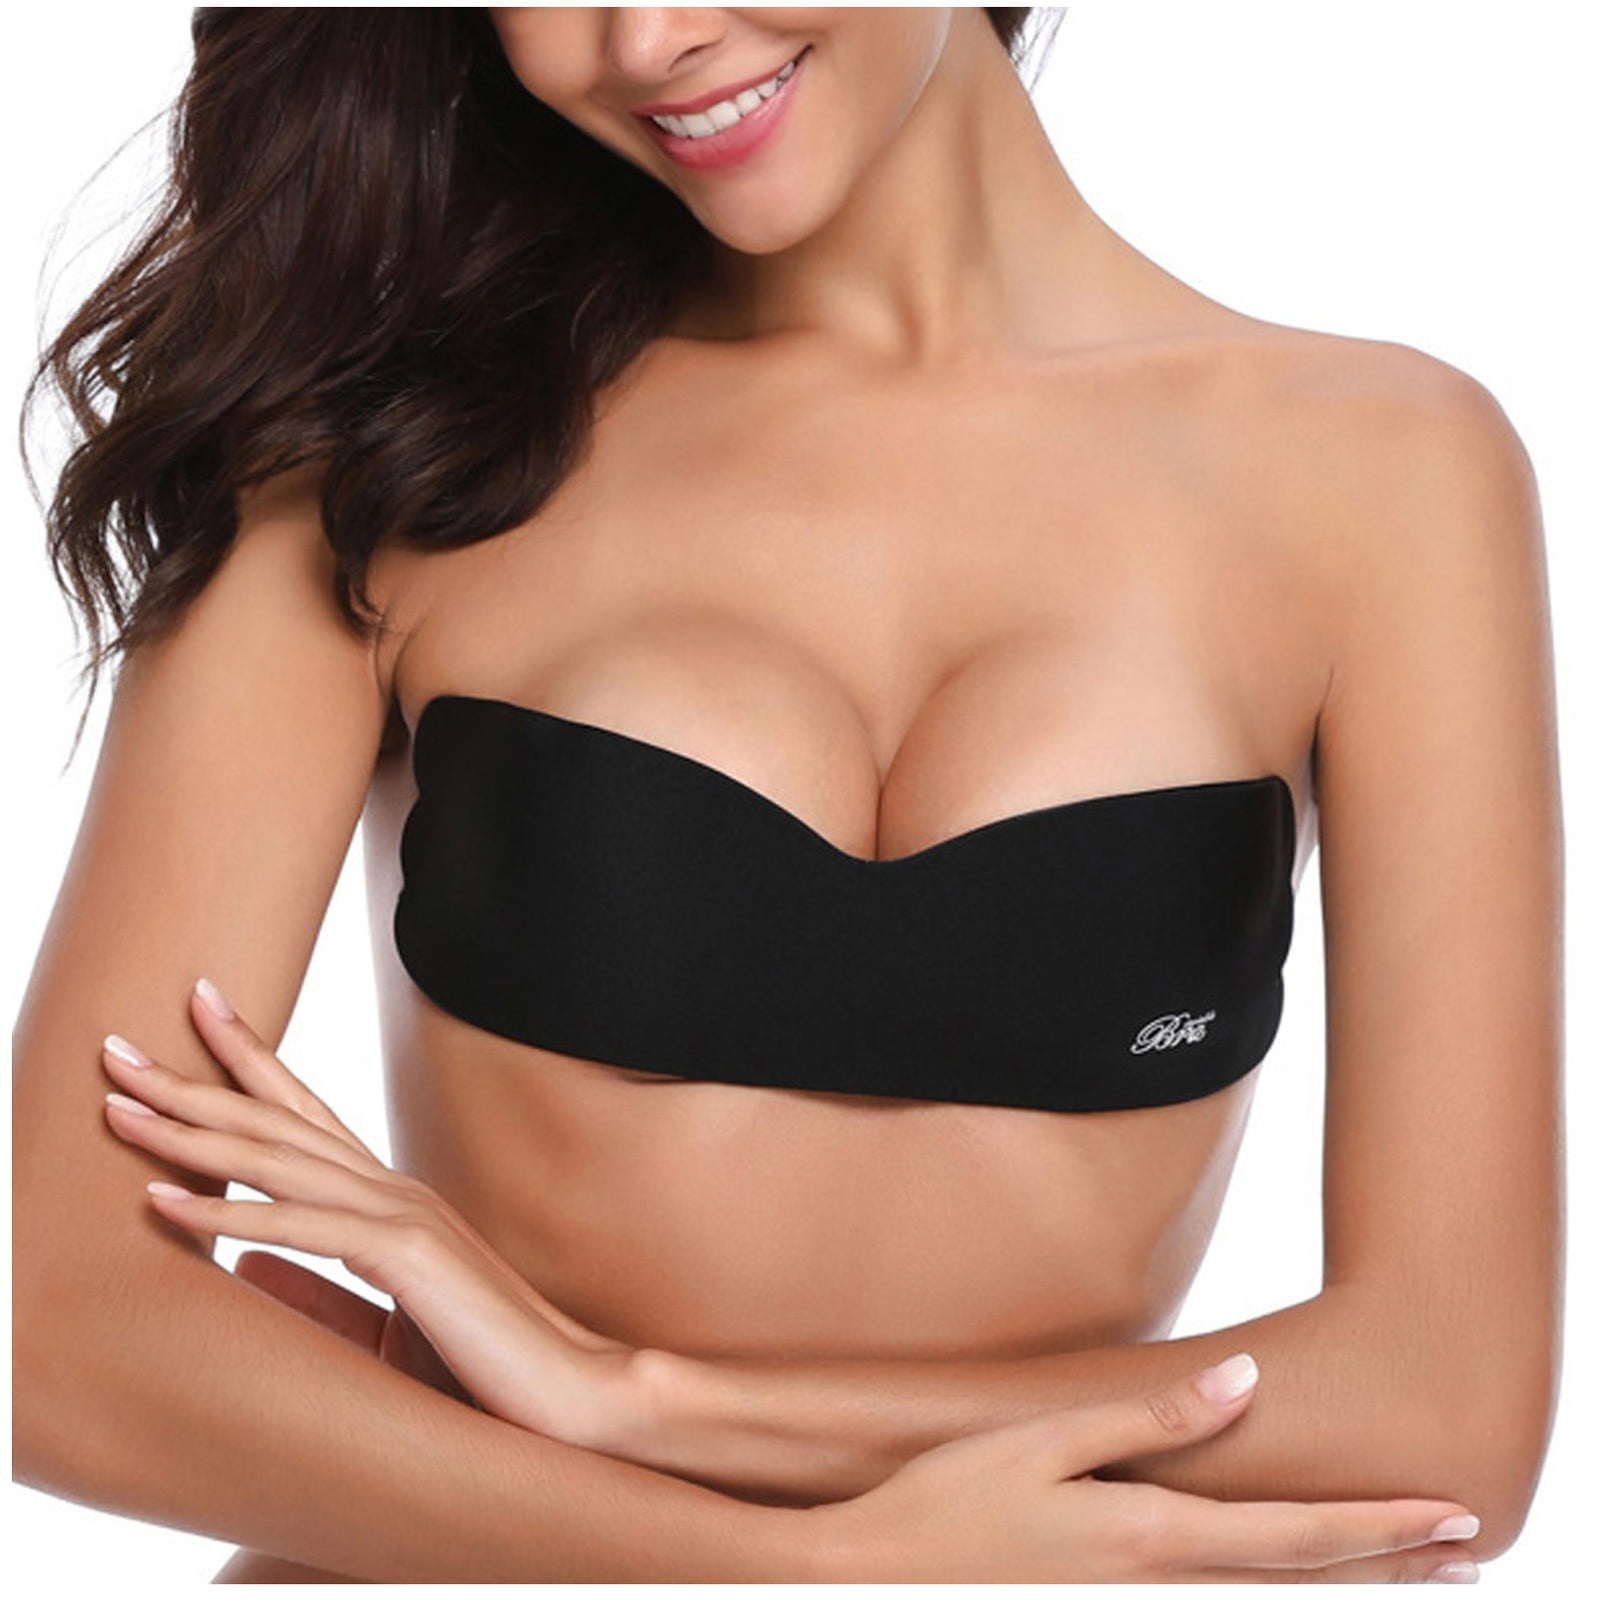 〖Hellobye〗Strapless Invisible Push Up Bra Tape Silicone Pull-up Bra Summer  Invisible Bra